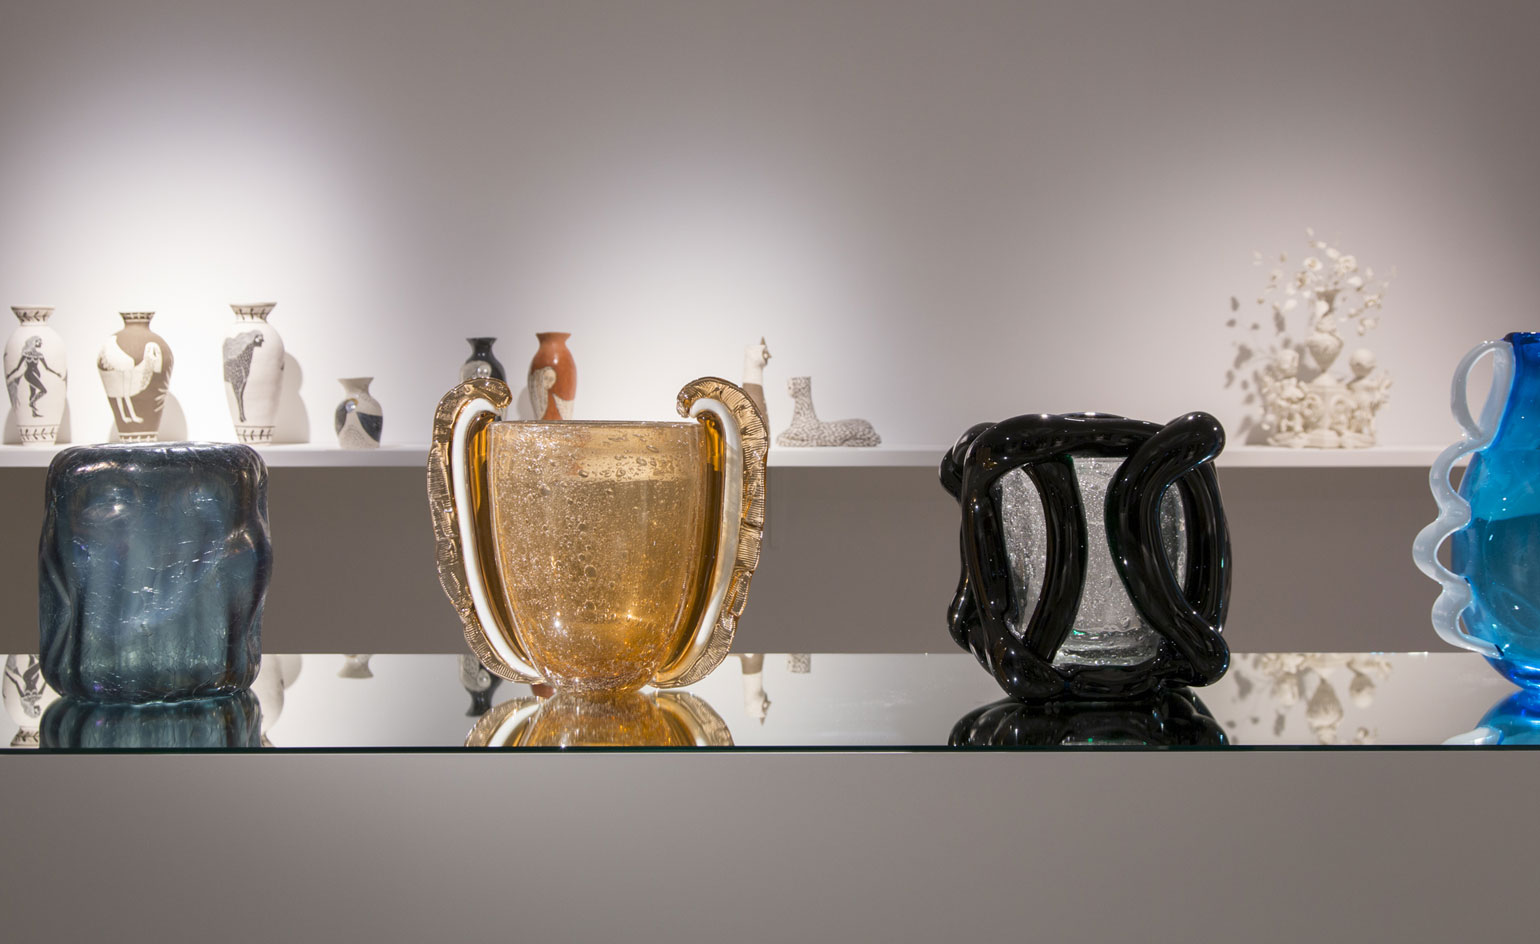 Contemporary vase design is celebrated at David Gill Gallery